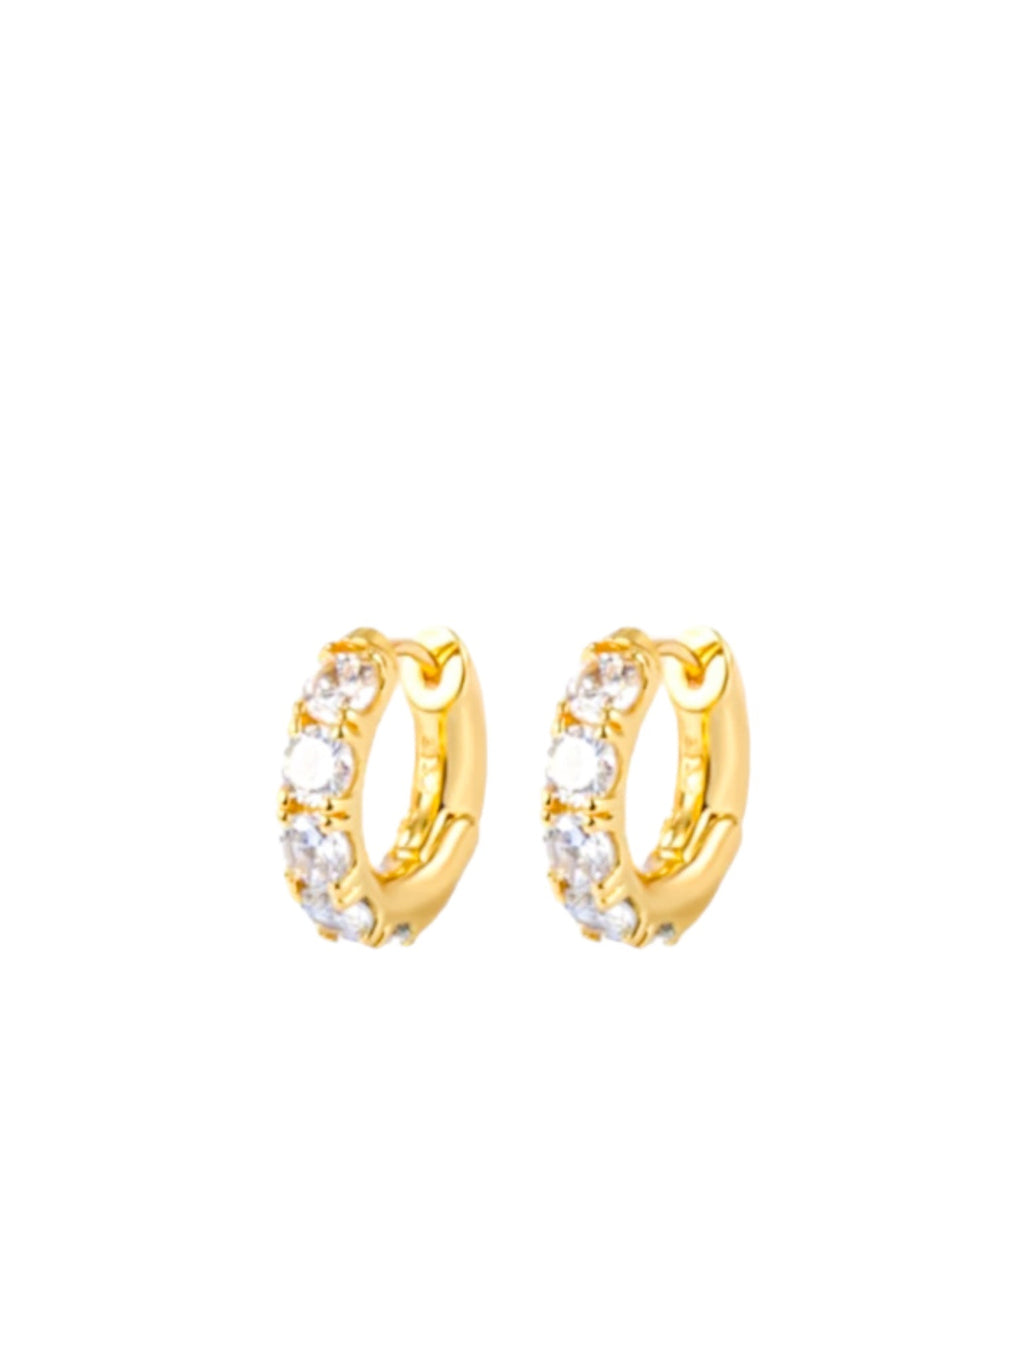 Lucid Huggie Hoop earrings featuring 18k Gold Plating, CZ's on a thick base that fits snug against the ear.